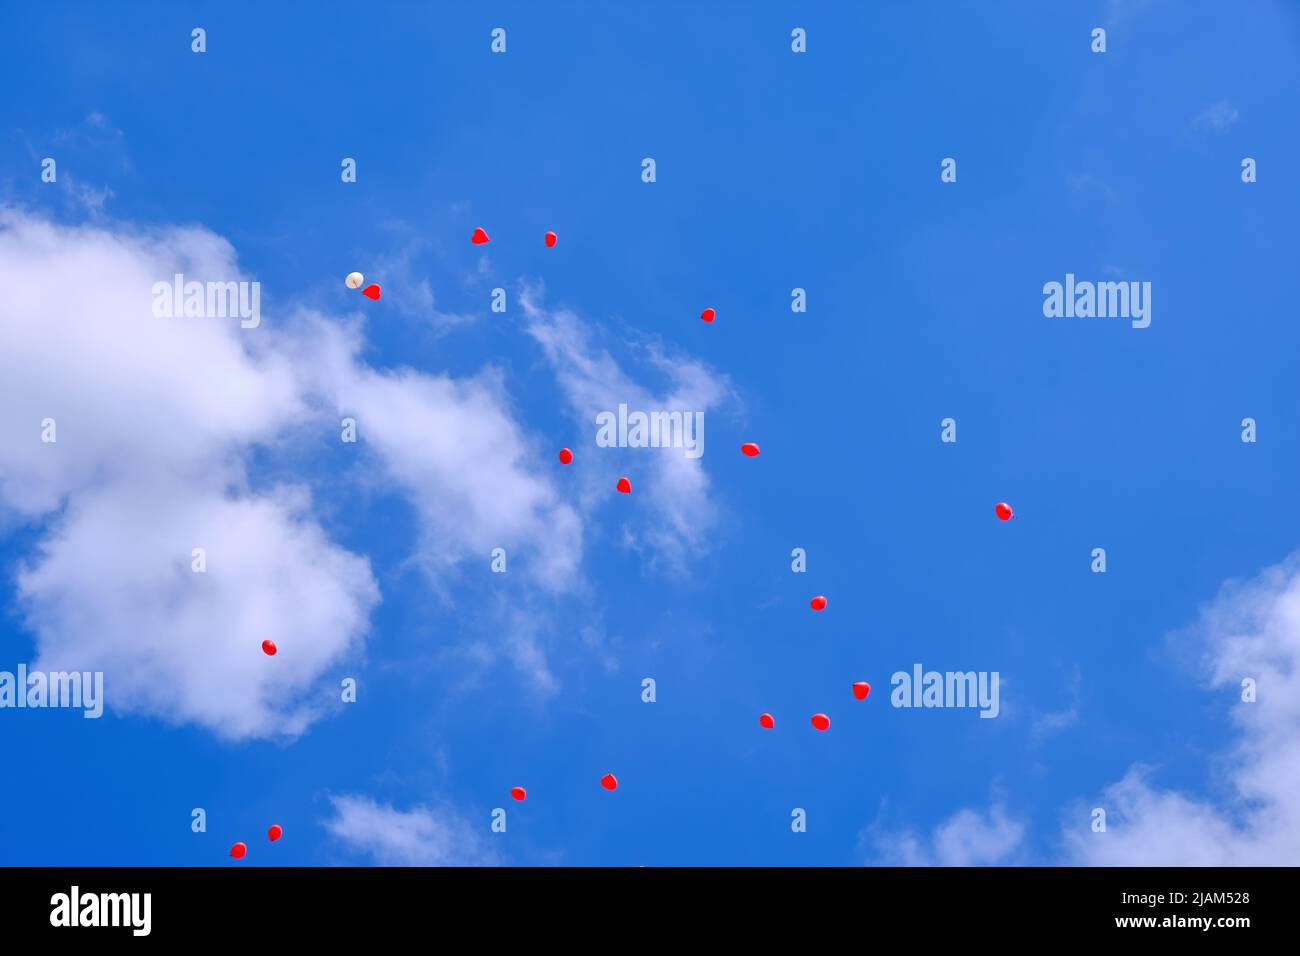 Heart-shaped balloons ascend into the blue cloudy sky. Stock Photo